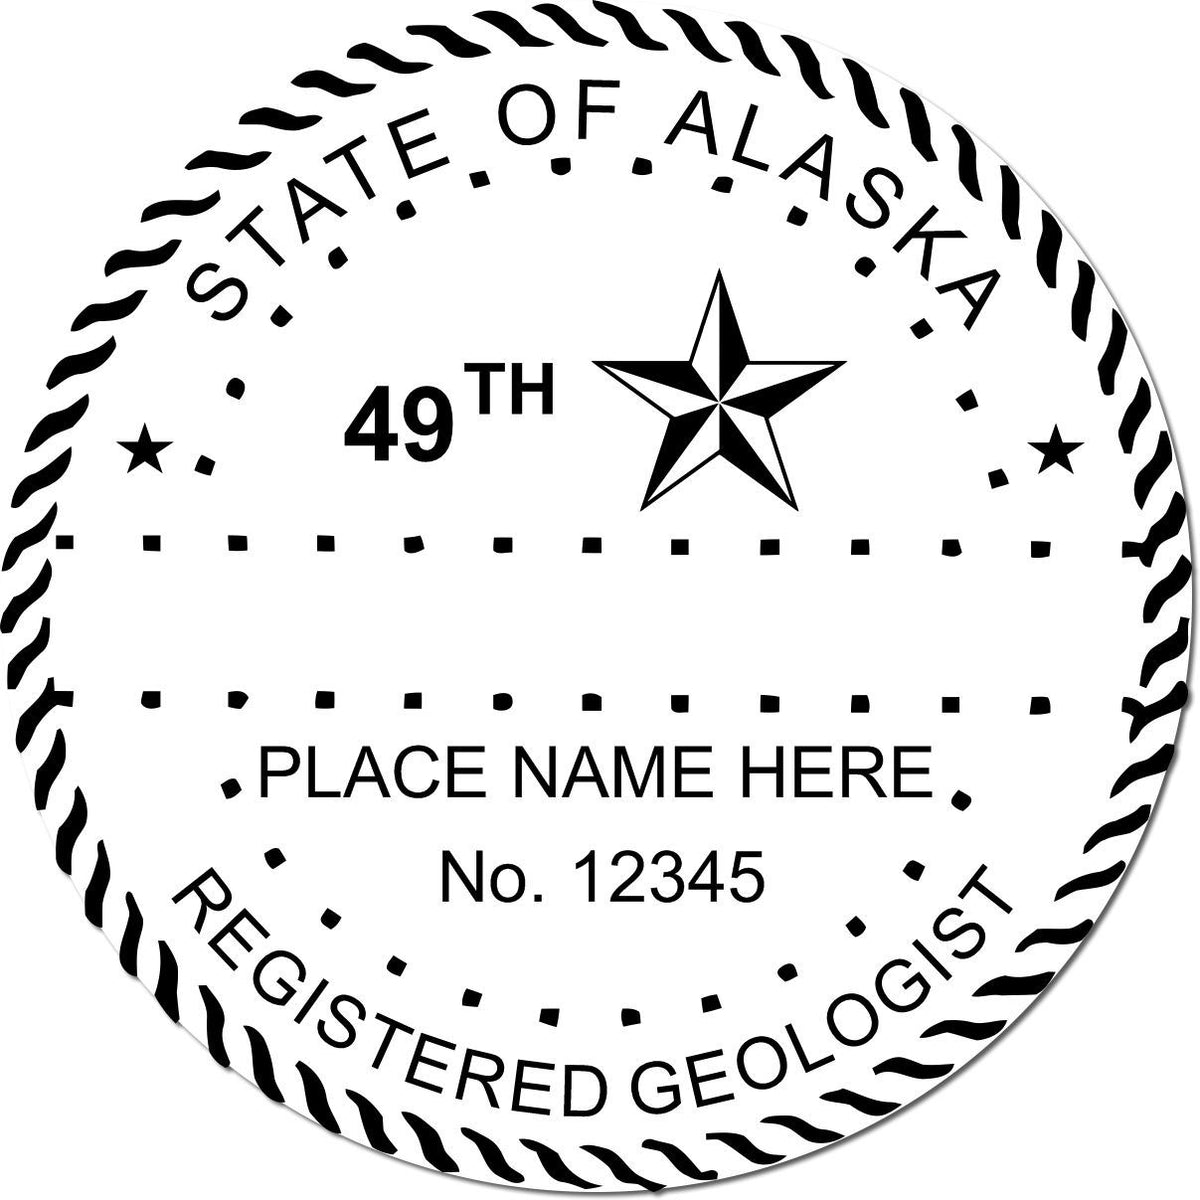 This paper is stamped with a sample imprint of the Digital Alaska Geologist Stamp, Electronic Seal for Alaska Geologist, signifying its quality and reliability.